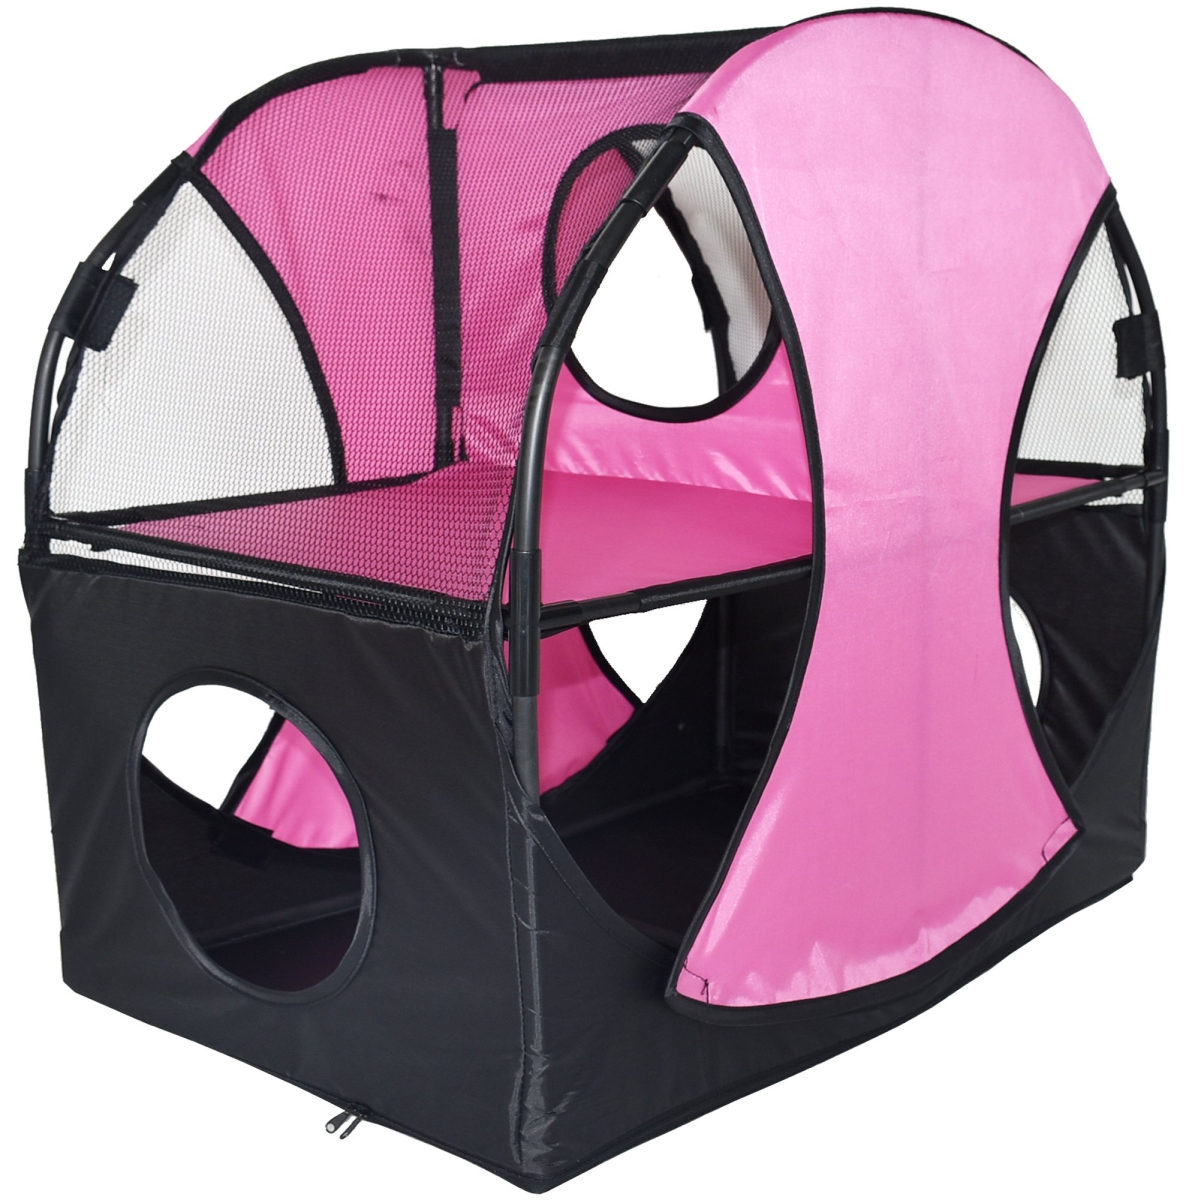 Kitty Play Pet Cat House, Pink & Black - One Size